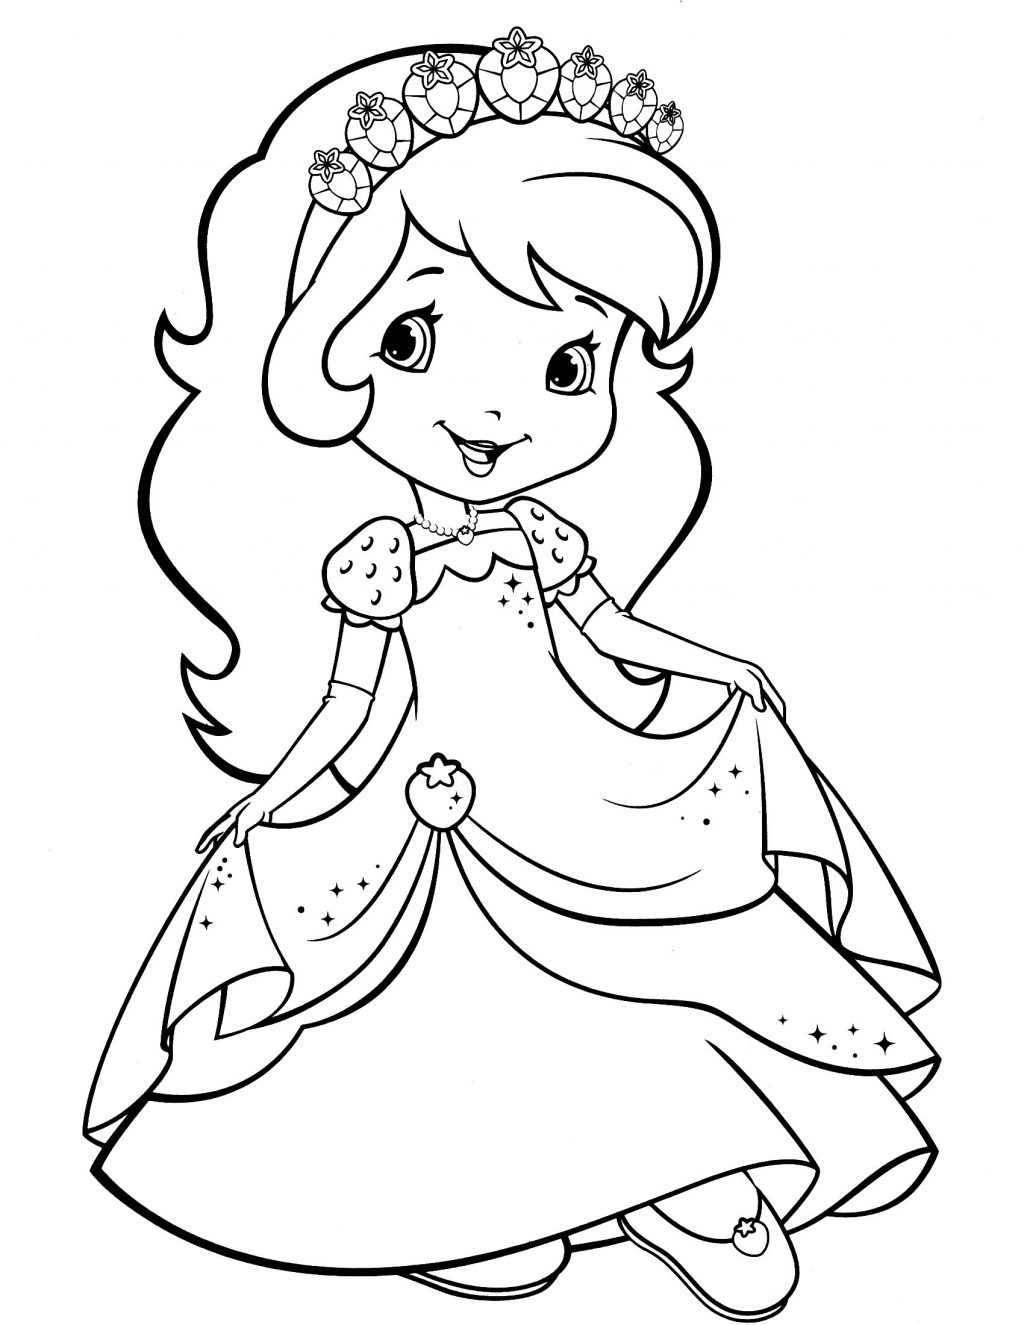 Strawberry Shortcake Coloring Pages Coloring Pages Strawberry - Strawberry Shortcake Coloring Pages Free Printable